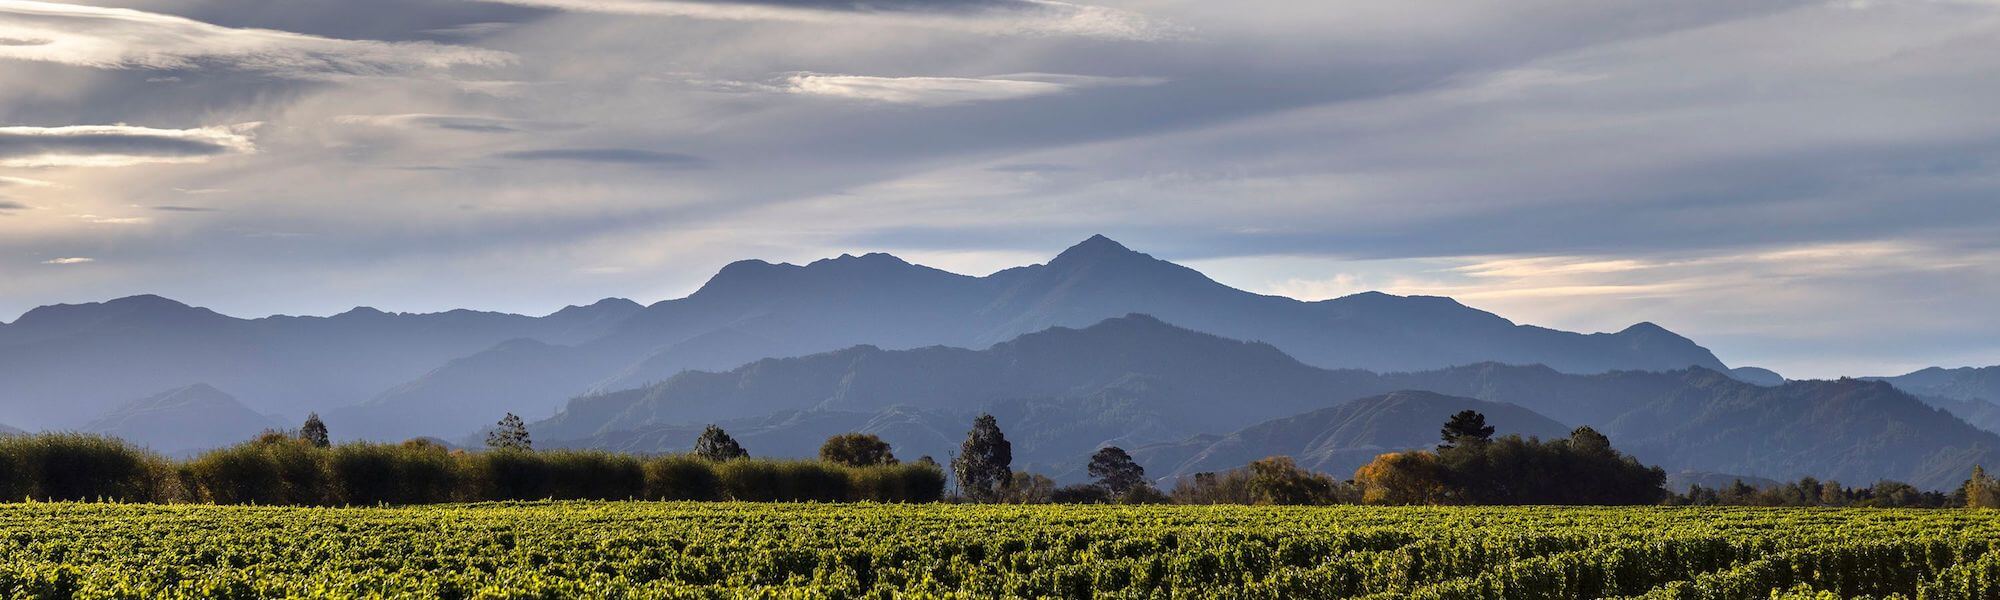 mountain and vineyard landscape